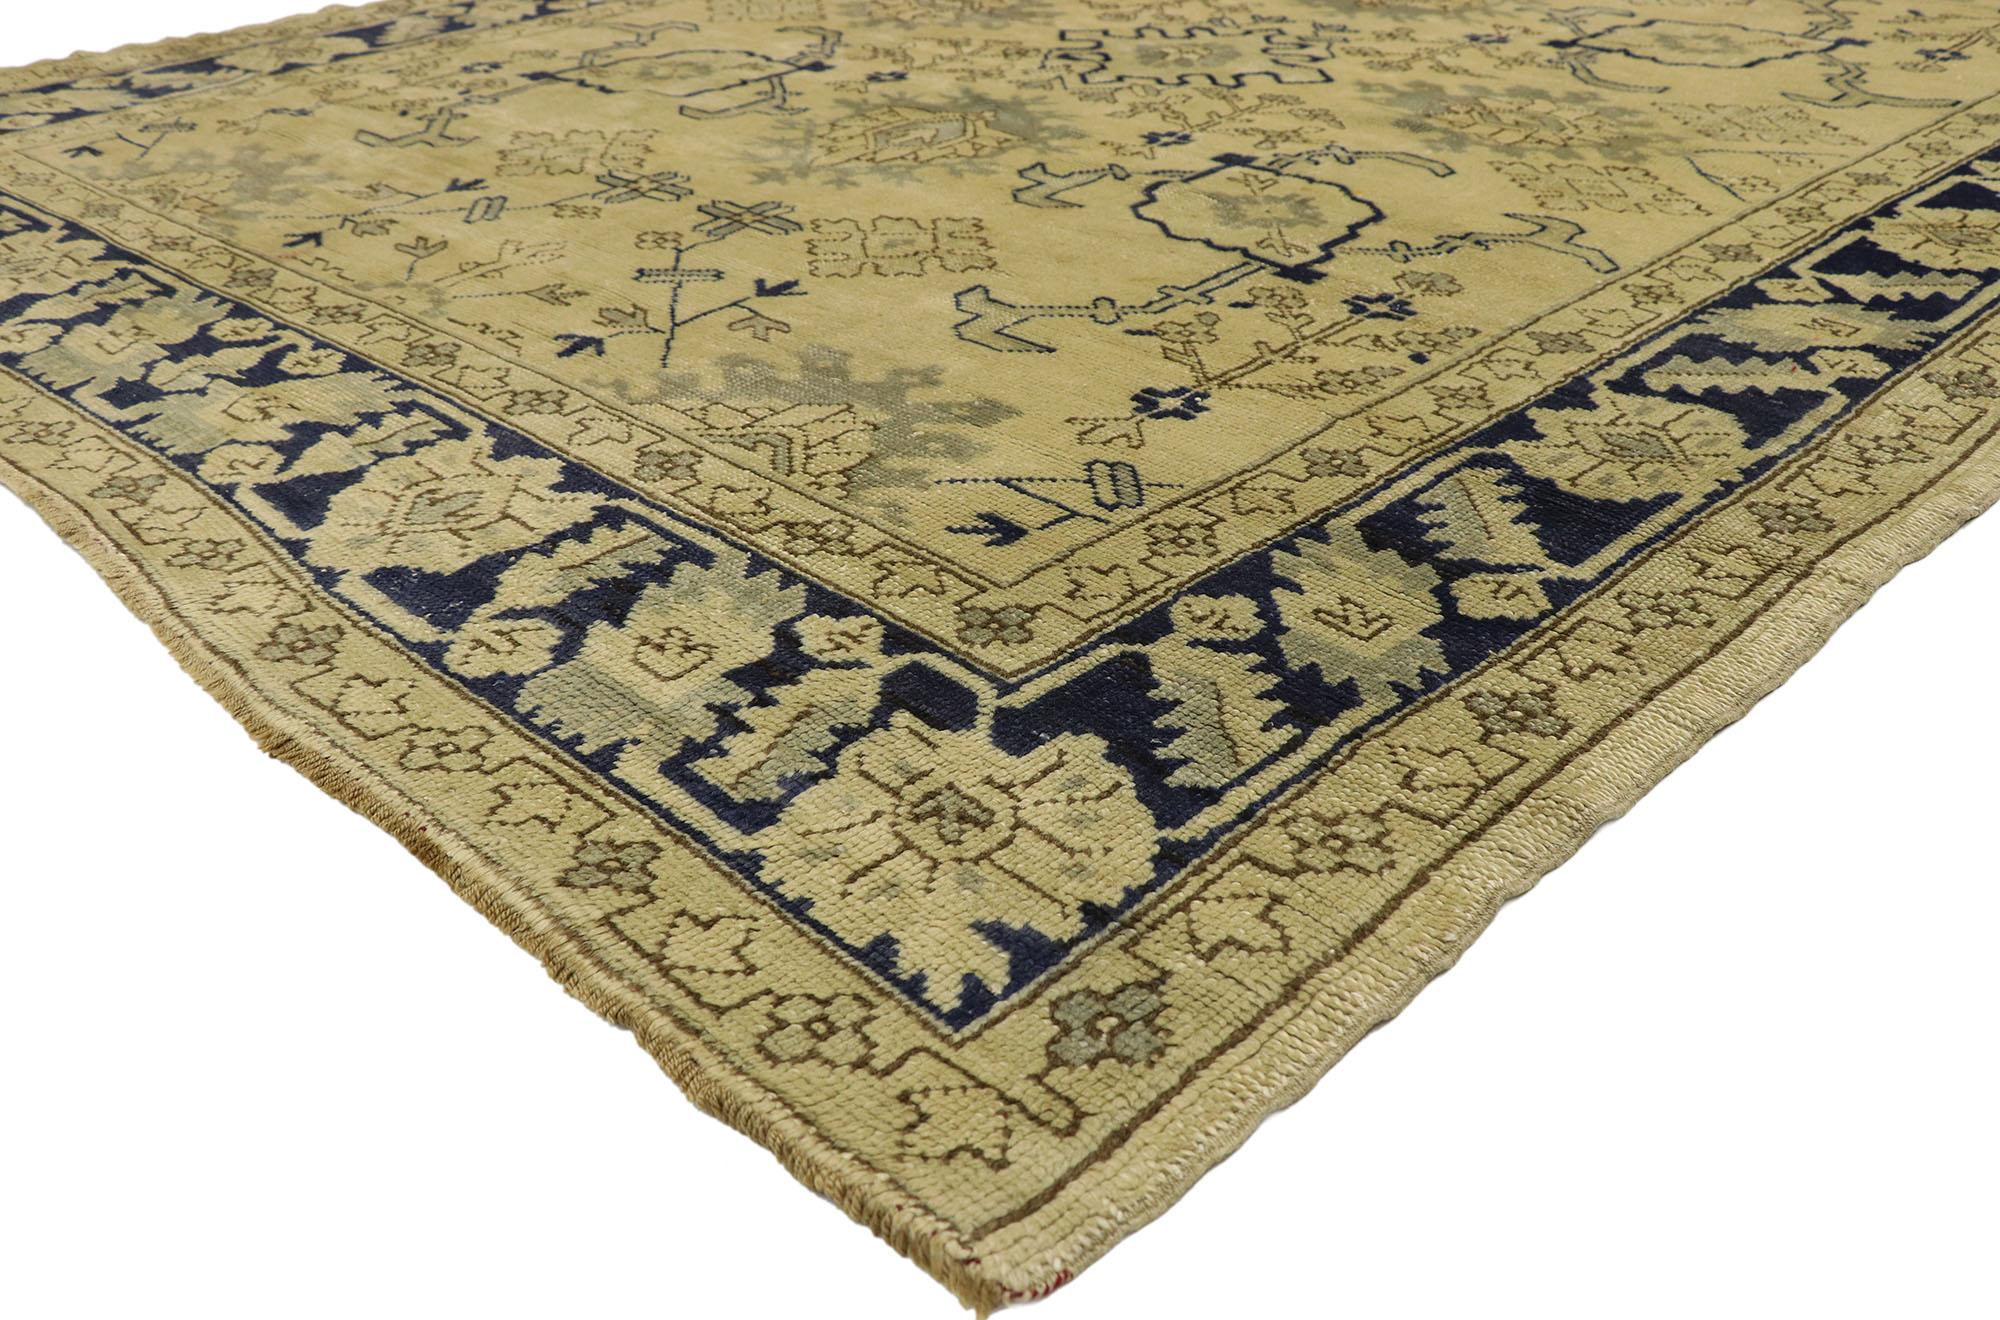 51403 Blue and beige vintage Turkish Oushak rug with Chinoiserie style. Embodying European sensibility with an artful balance between warm and inviting, this hand-knotted vintage Turkish Oushak rug recalls the surface designs of Fine China, blue and